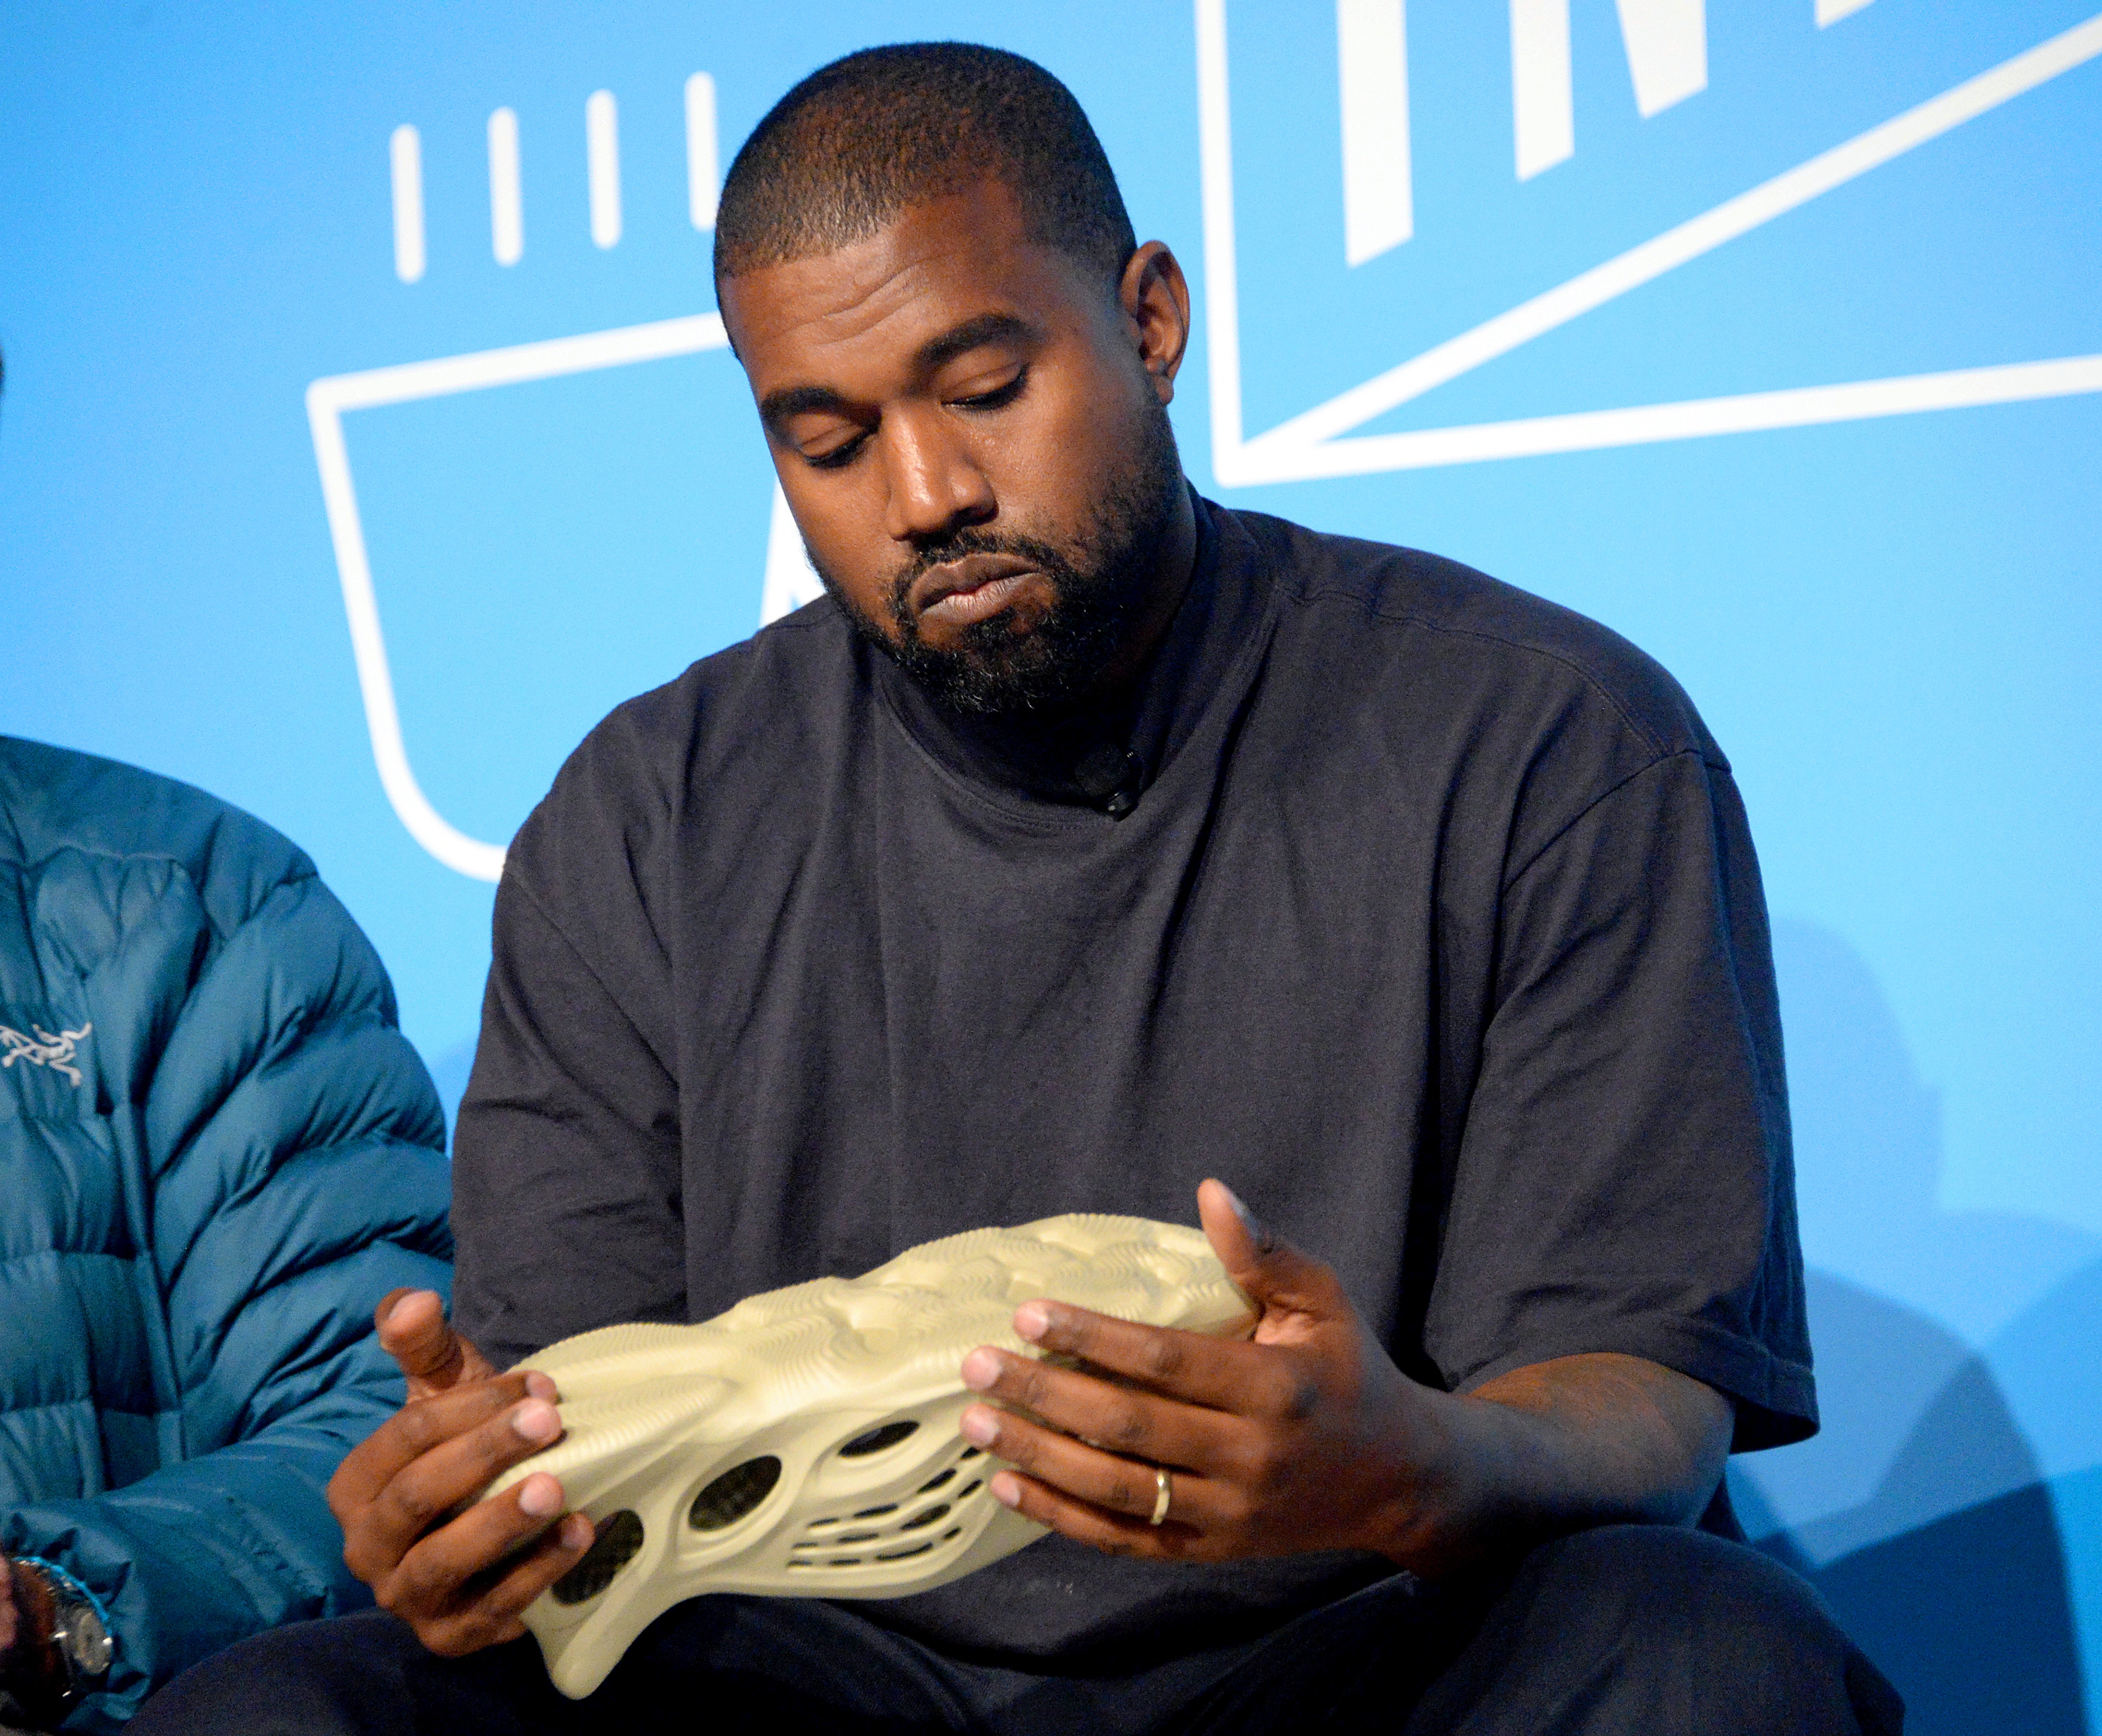 Kanye West holding a Yeezy shoe in 2019